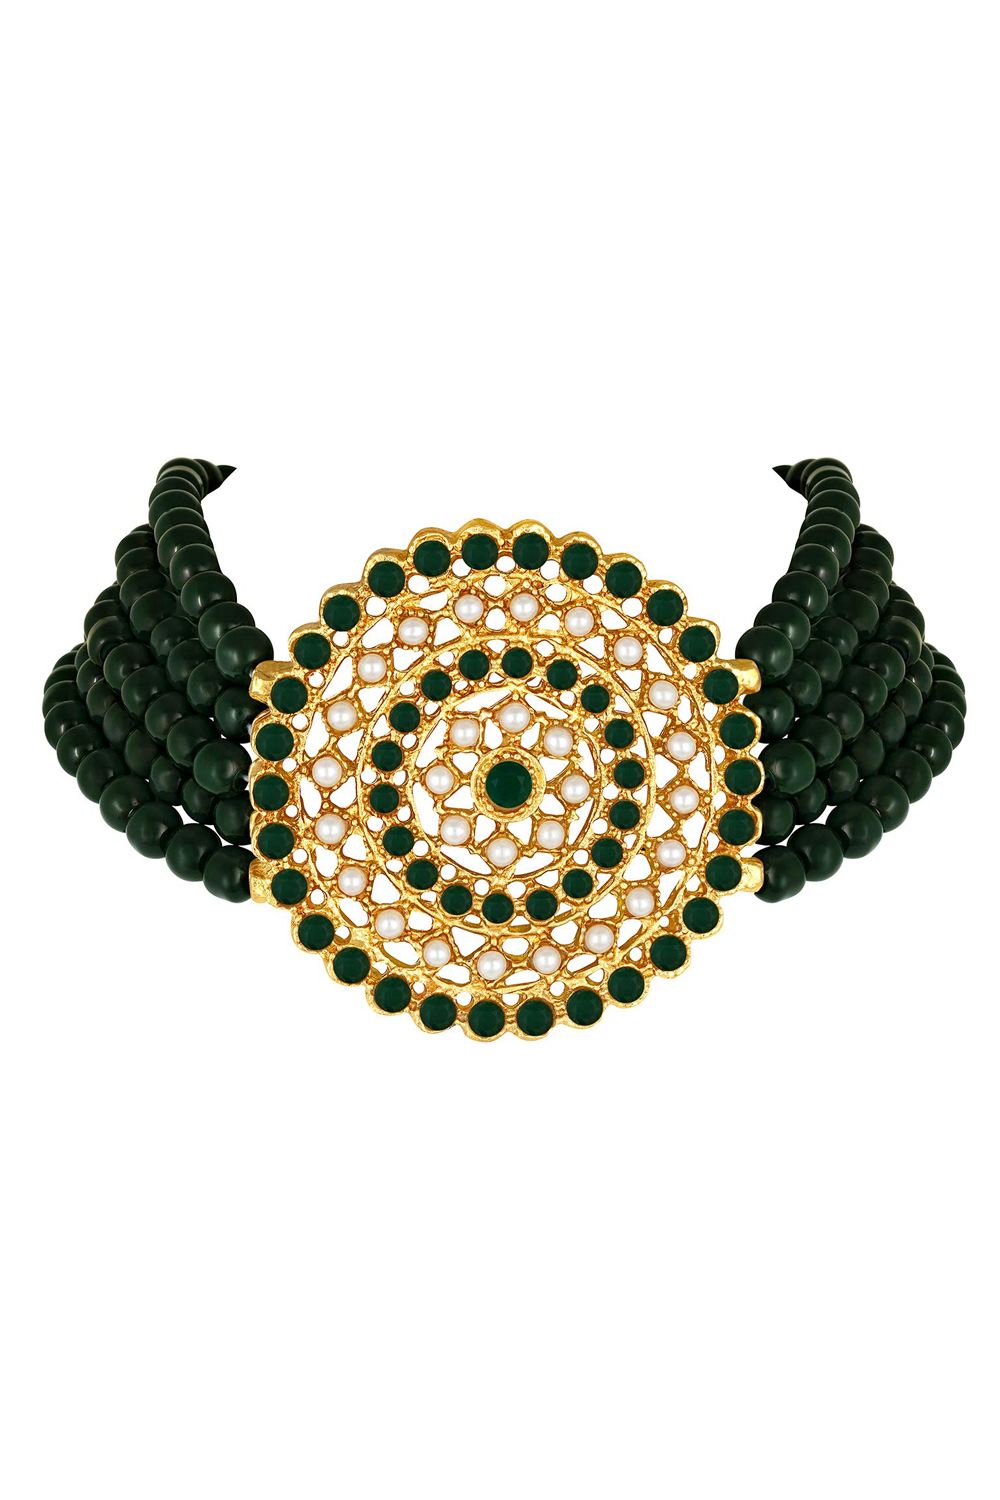 Buy Online Green and Gold Jewellery Set